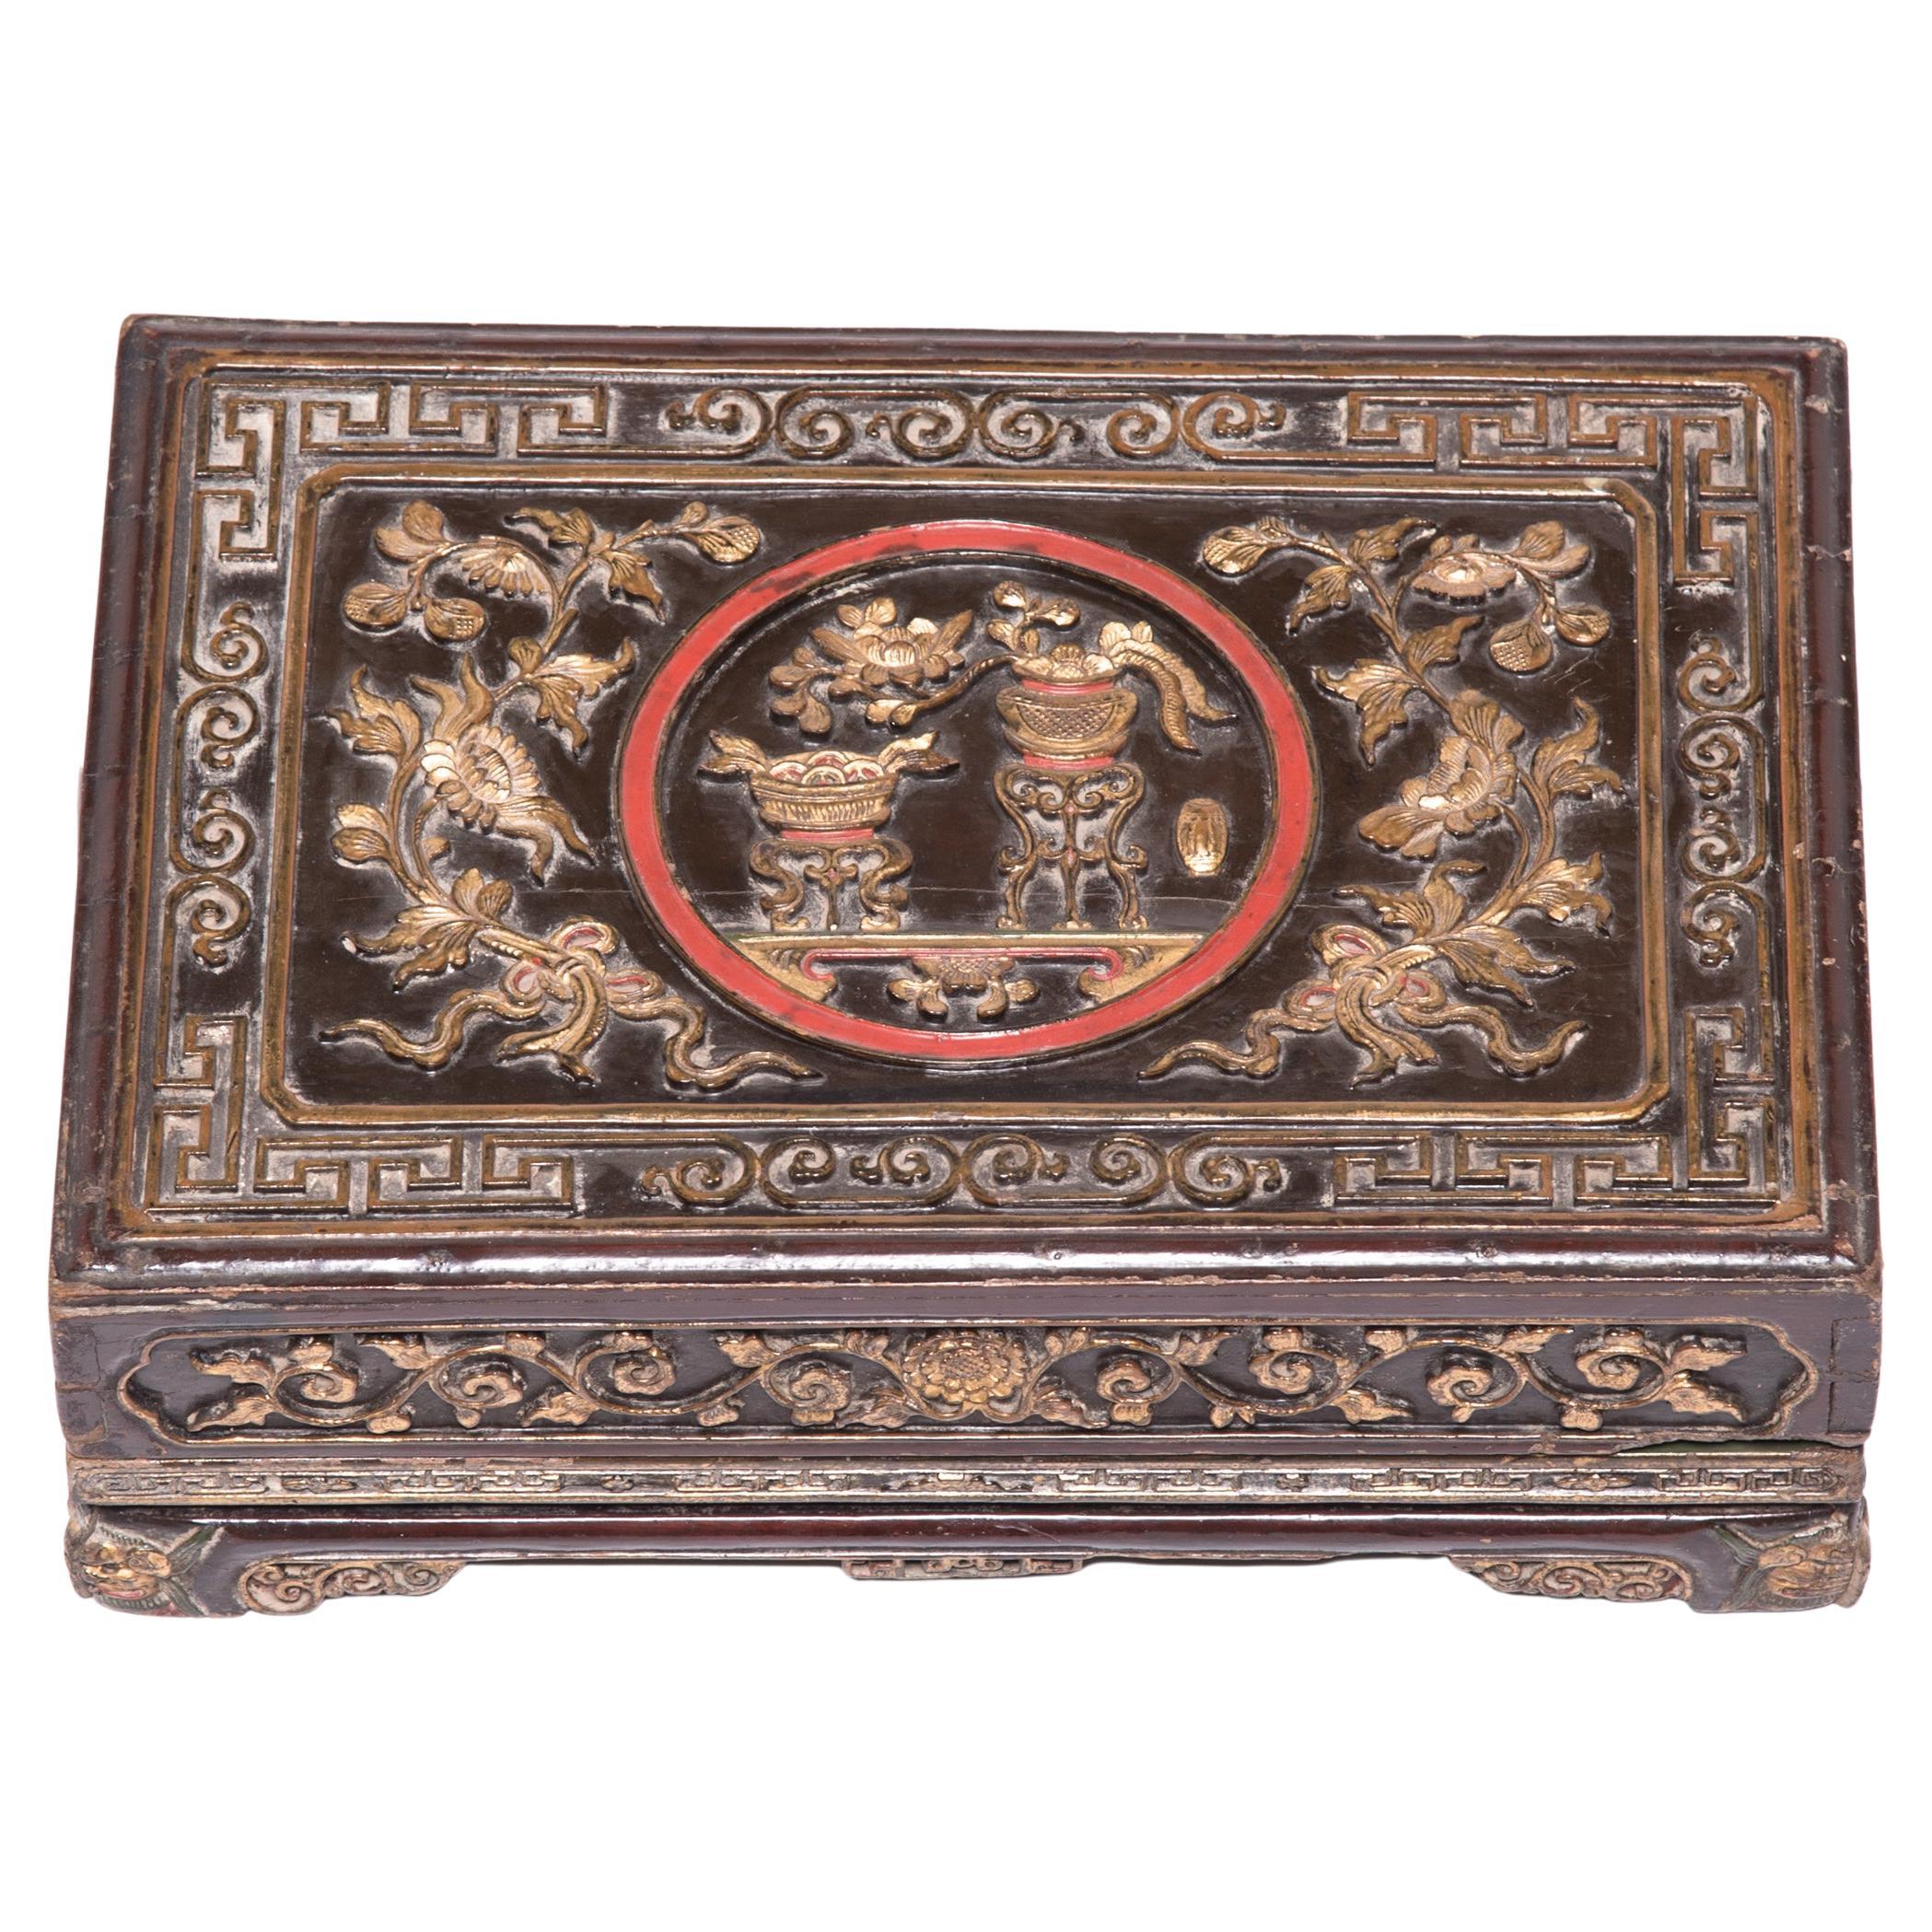 Chinese Eternal Love Offering Box, c. 1800